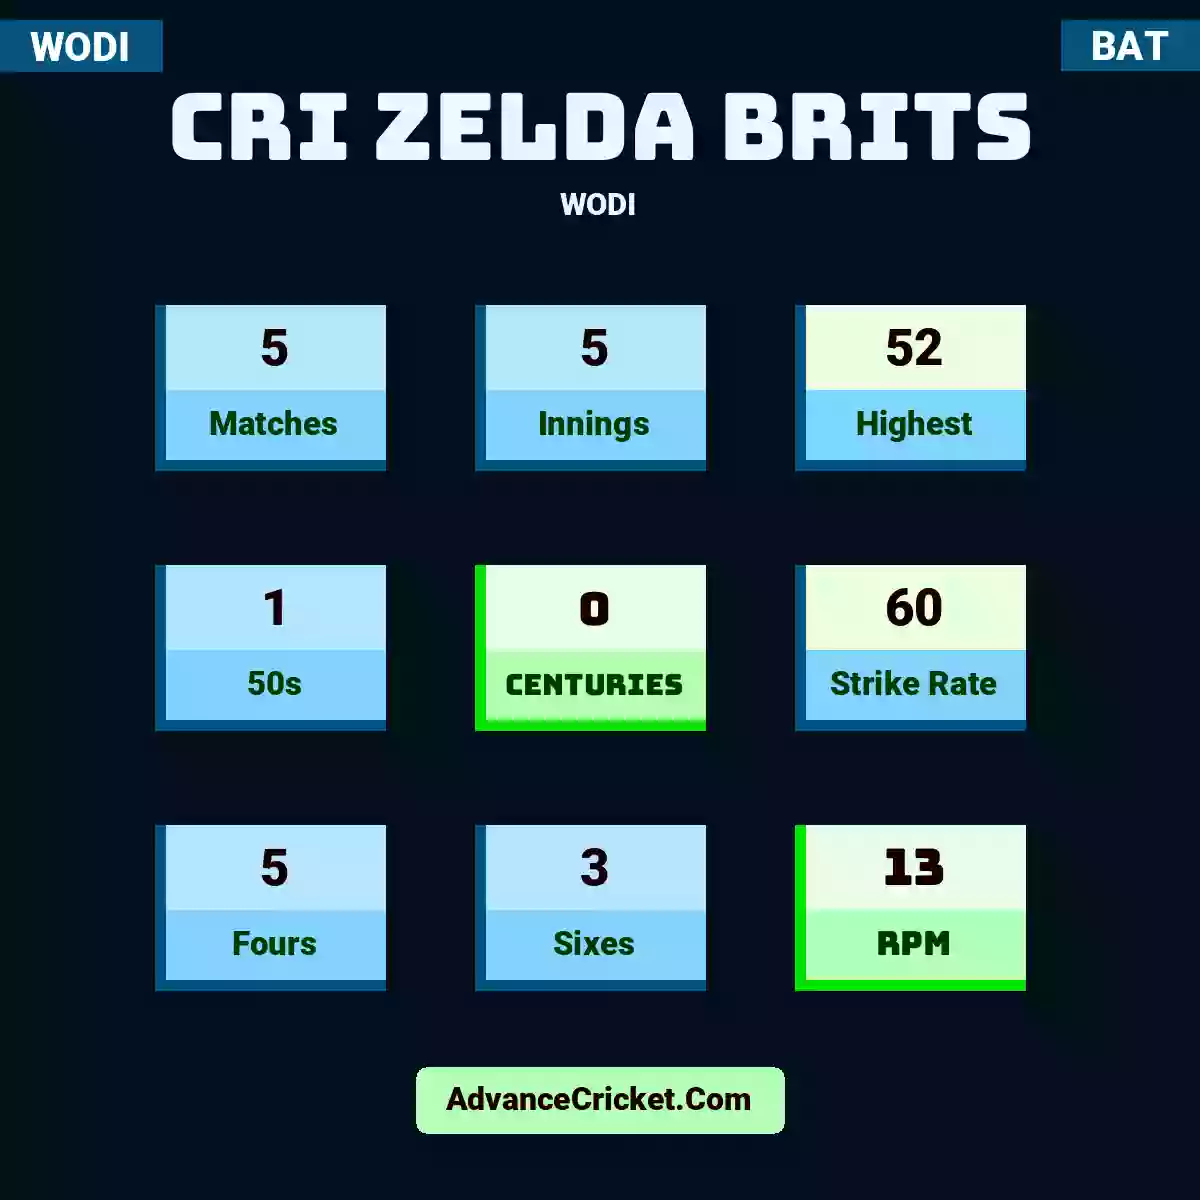 Cri zelda Brits WODI , Cri zelda Brits played 5 matches, scored 52 runs as highest, 1 half-centuries, and 0 centuries, with a strike rate of 60. C.Brits hit 5 fours and 3 sixes, with an RPM of 13.